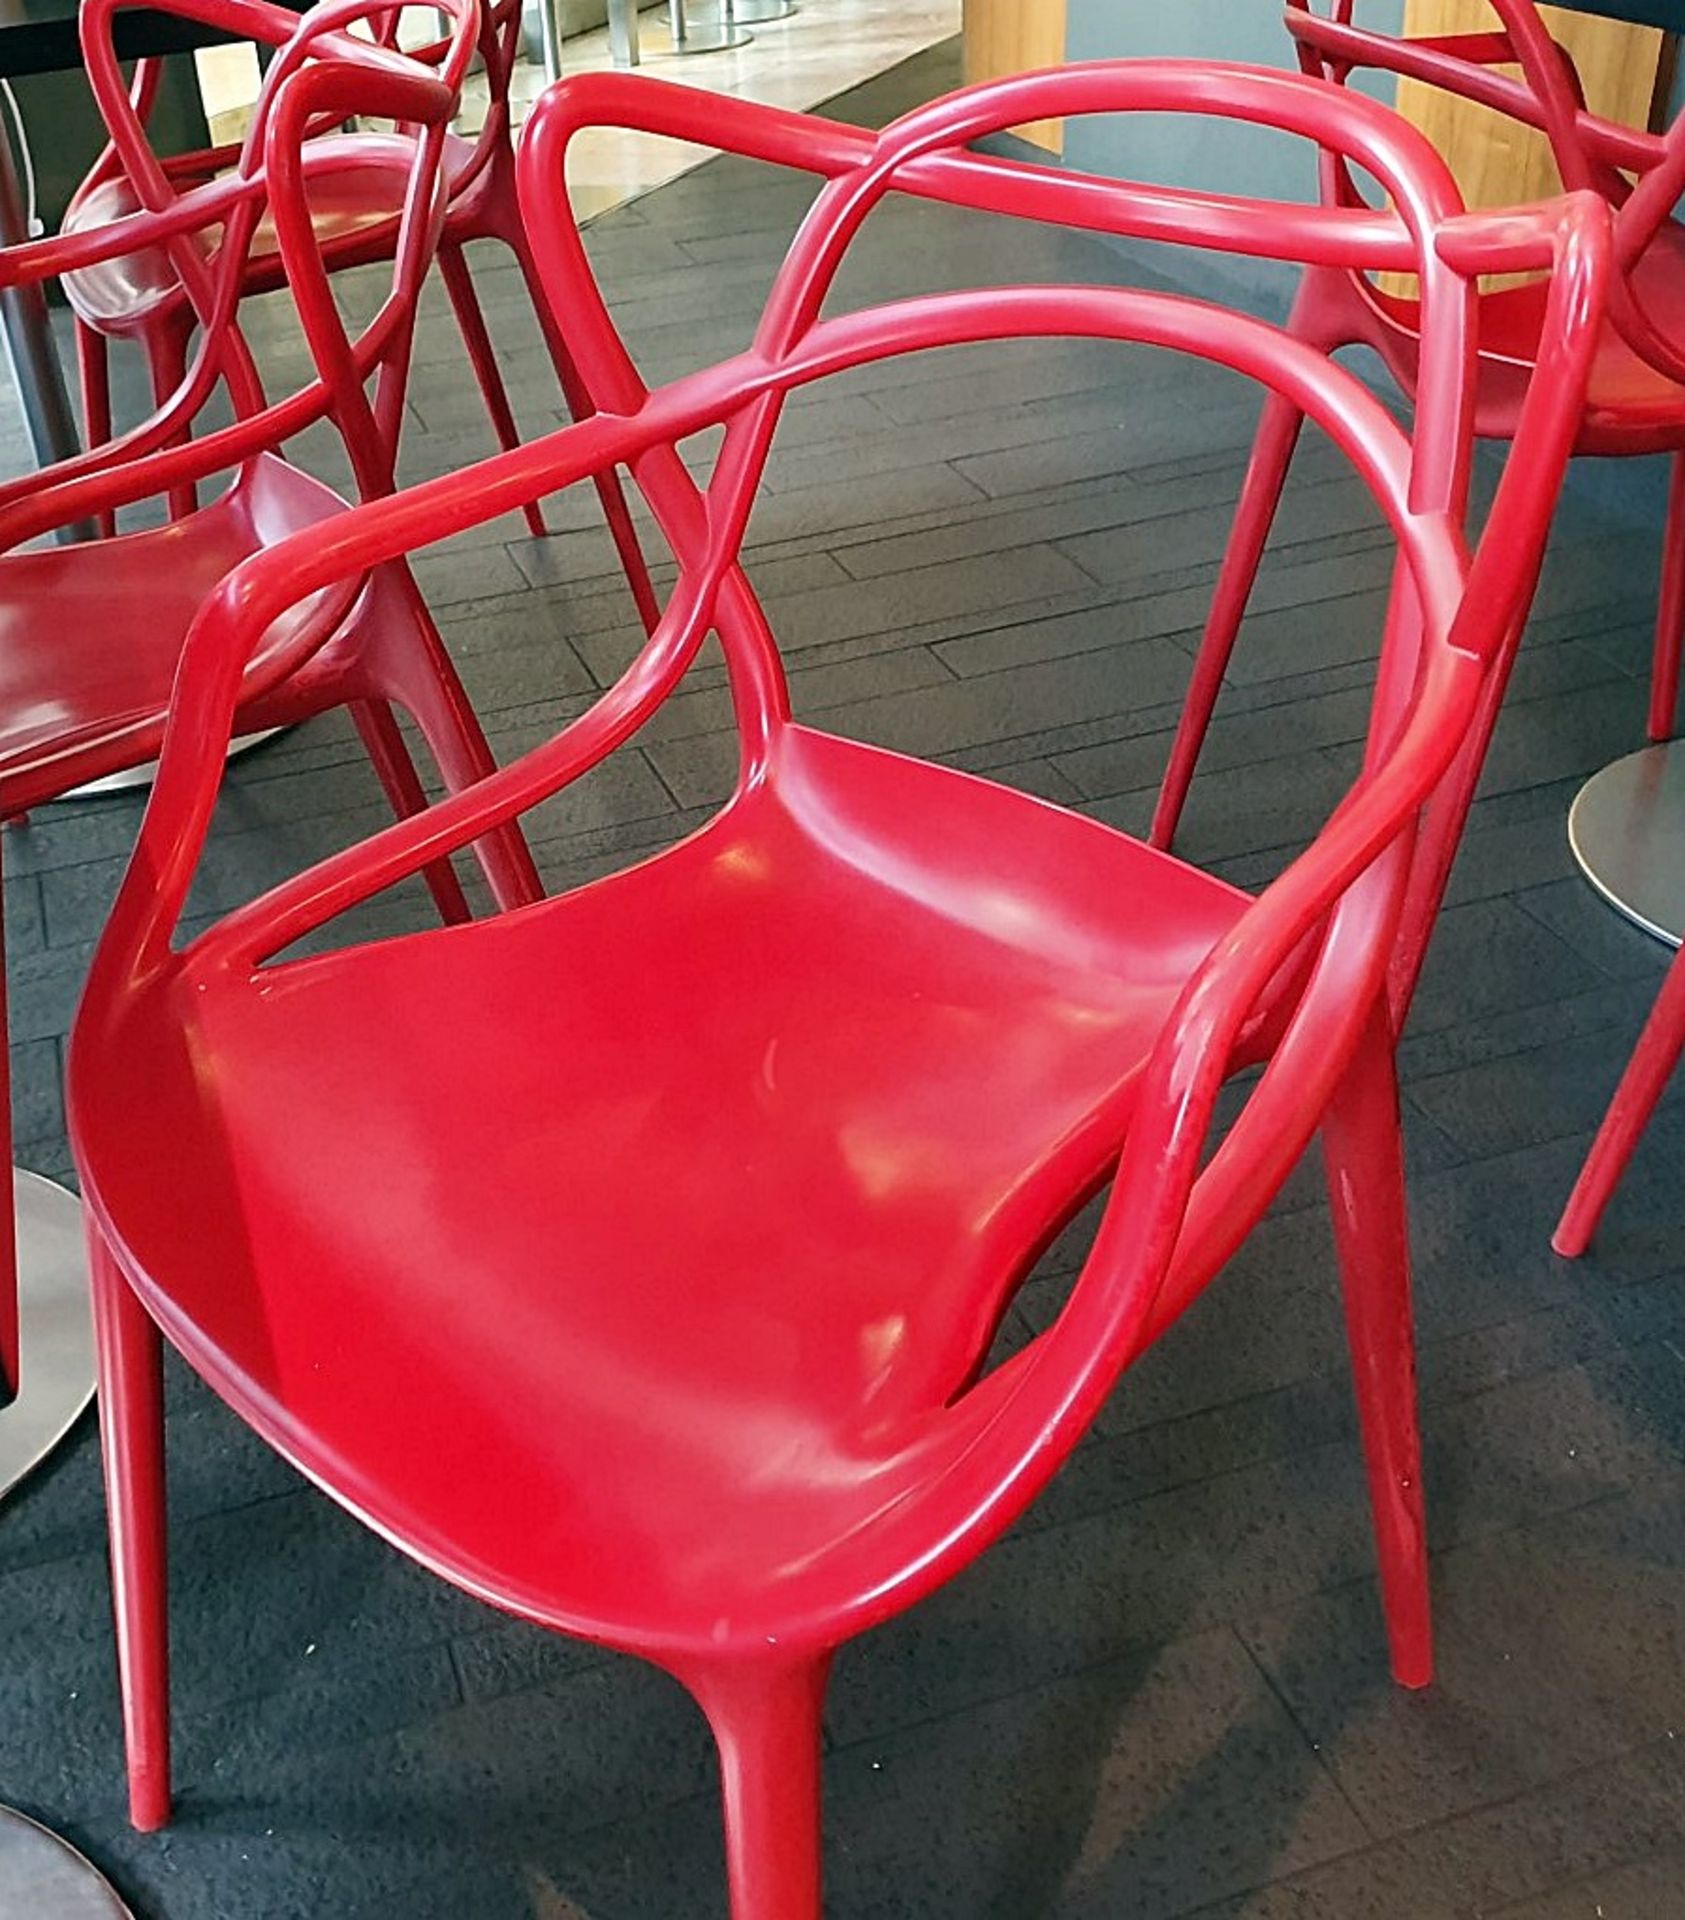 10 x Philippe Starck For Kartell 'Masters' Designer Red Gloss Bistro Chairs - Made In Italy - Used - Image 7 of 9